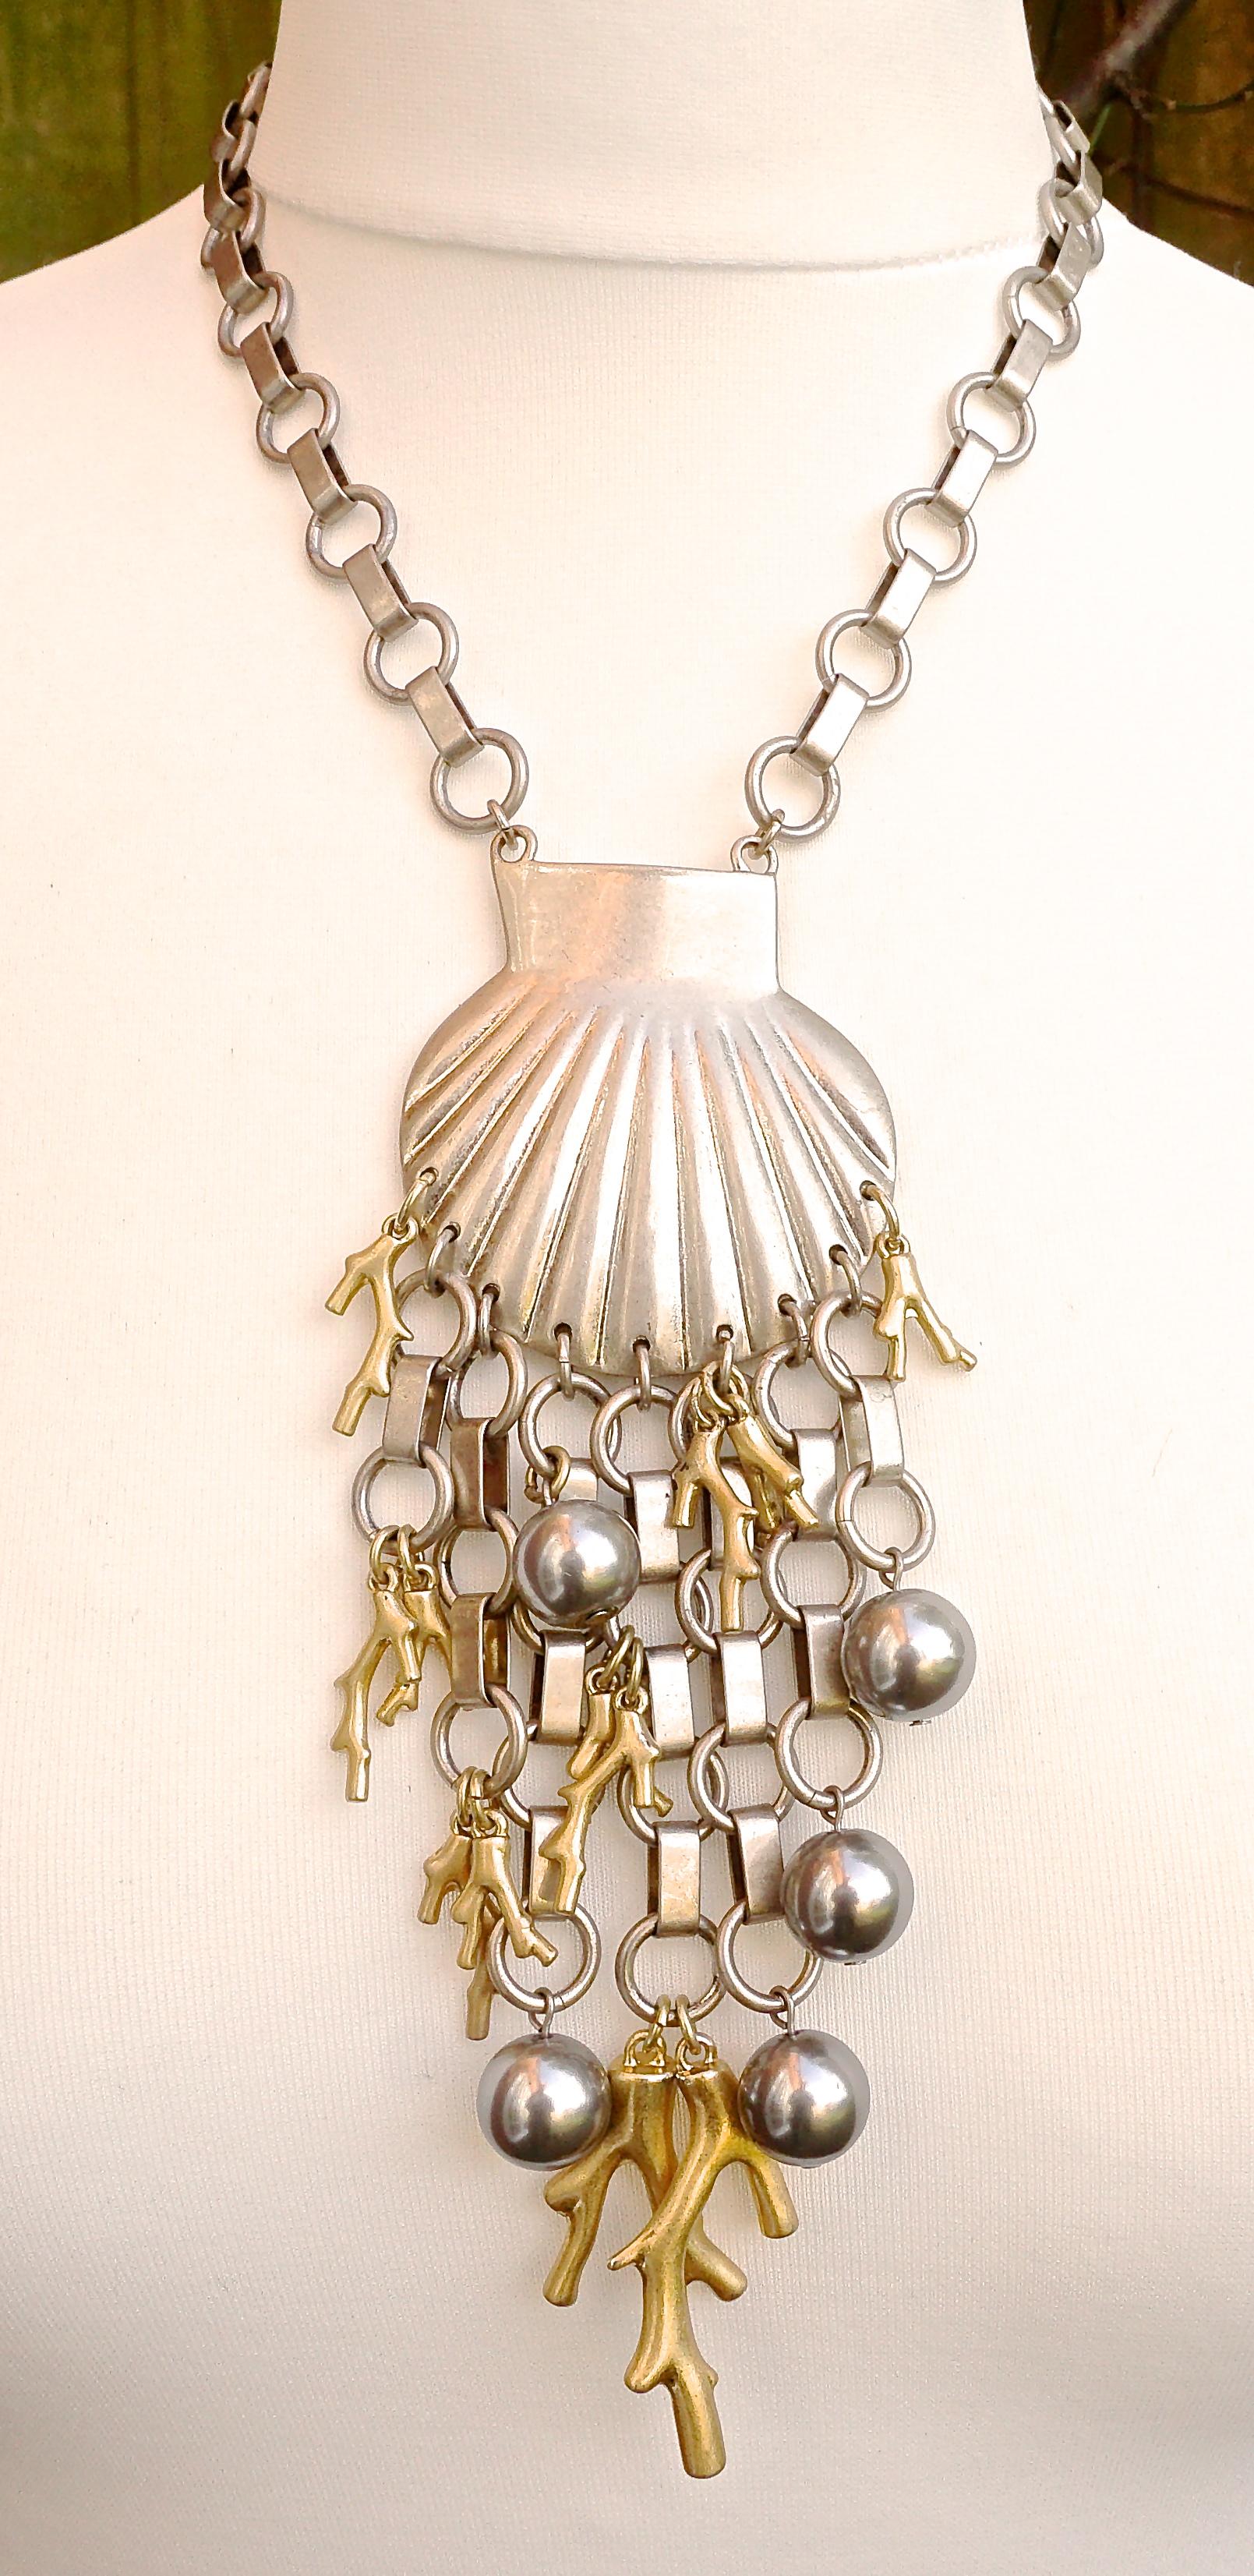 Marc by Marc Jacobs silver plated and gold plated pendant necklace featuring a large silver seashell with an underwater design comprising silver chain, silver ball and gold coral drops. The necklace is length 46.2cm / 18.19 inches, and the pendant